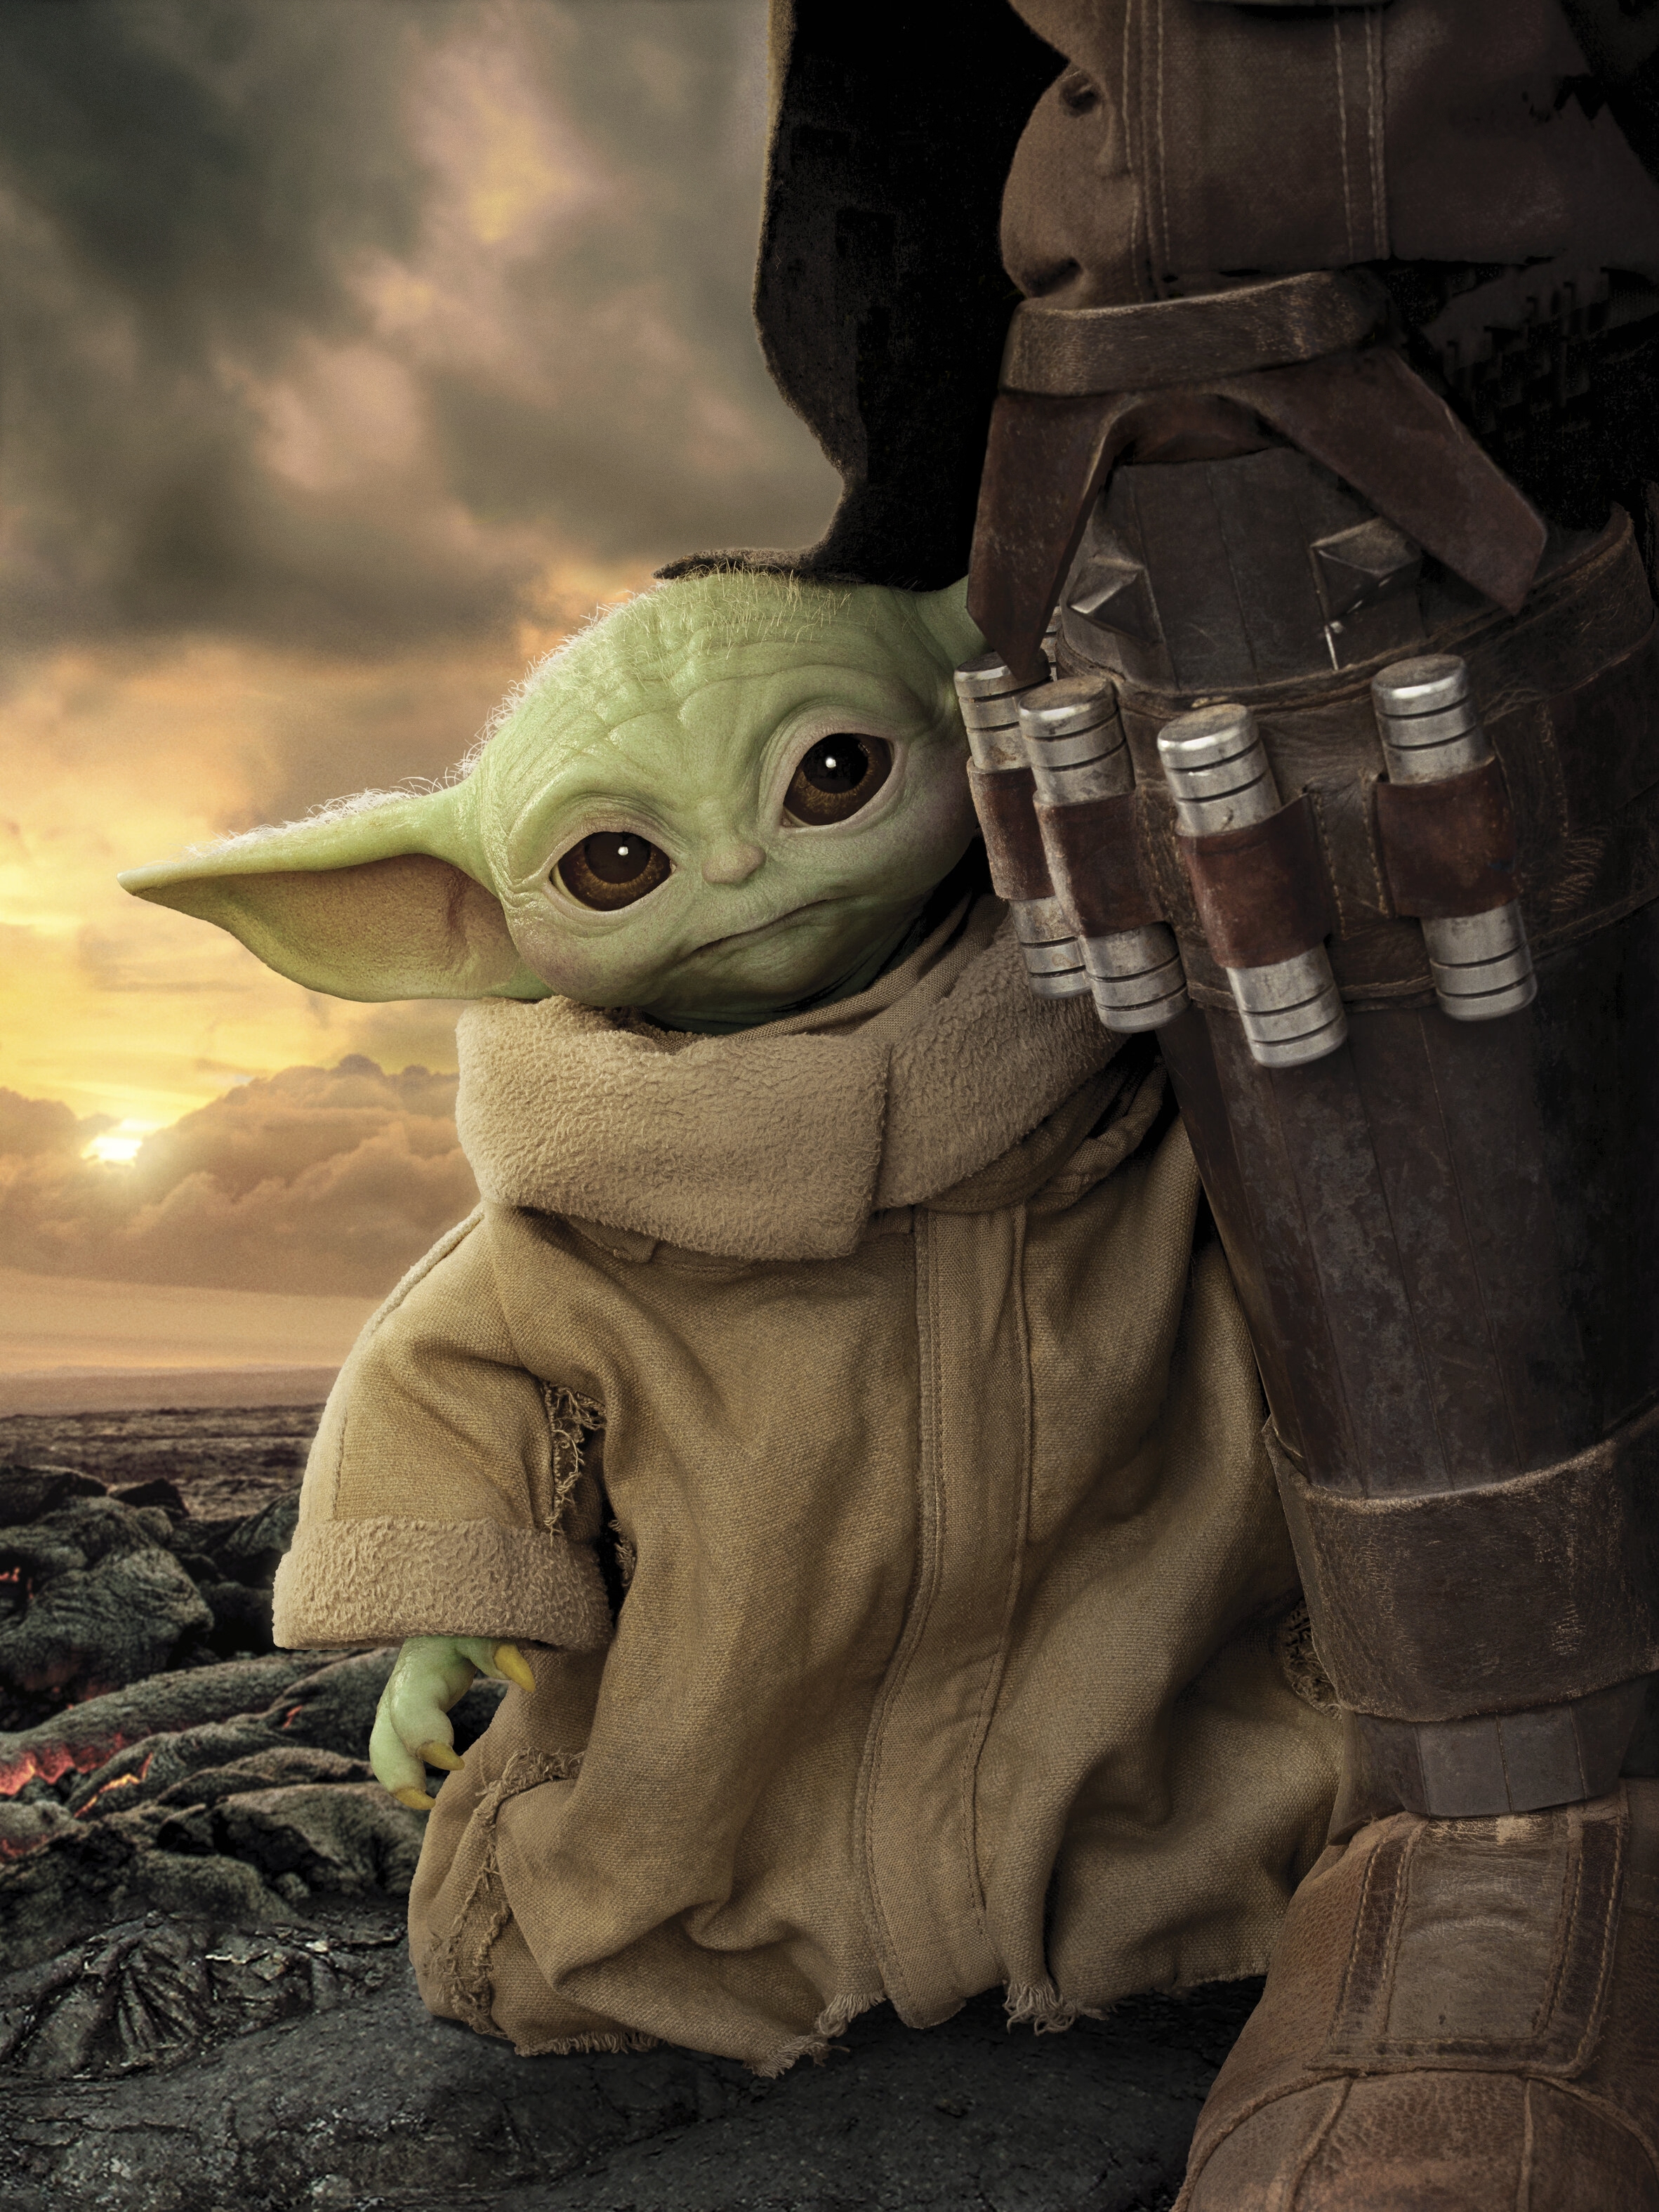 480x854 Baby Yoda Star Wars Mandalorian 2 Android One Mobile Wallpaper Hd Tv Series 4k Wallpapers Images Photos And Background Wallpapers Den